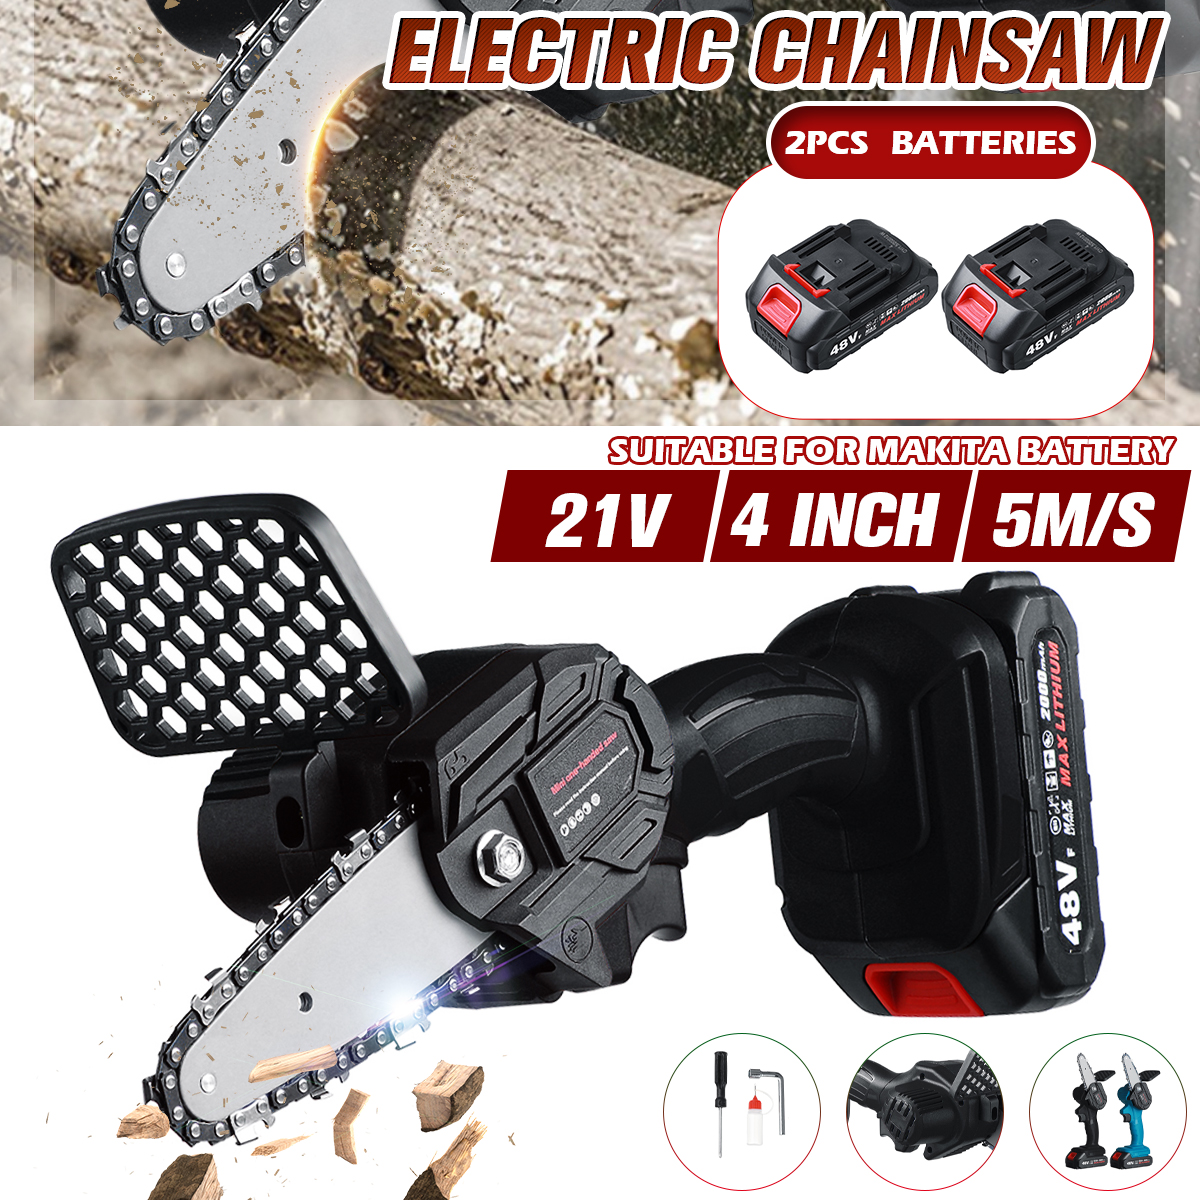 21V-4quot-Cordless-Electric-Chain-Saw-Rechargeable-Woodworking-Cutting-Saw-W-2pcs-Battery-1814933-1